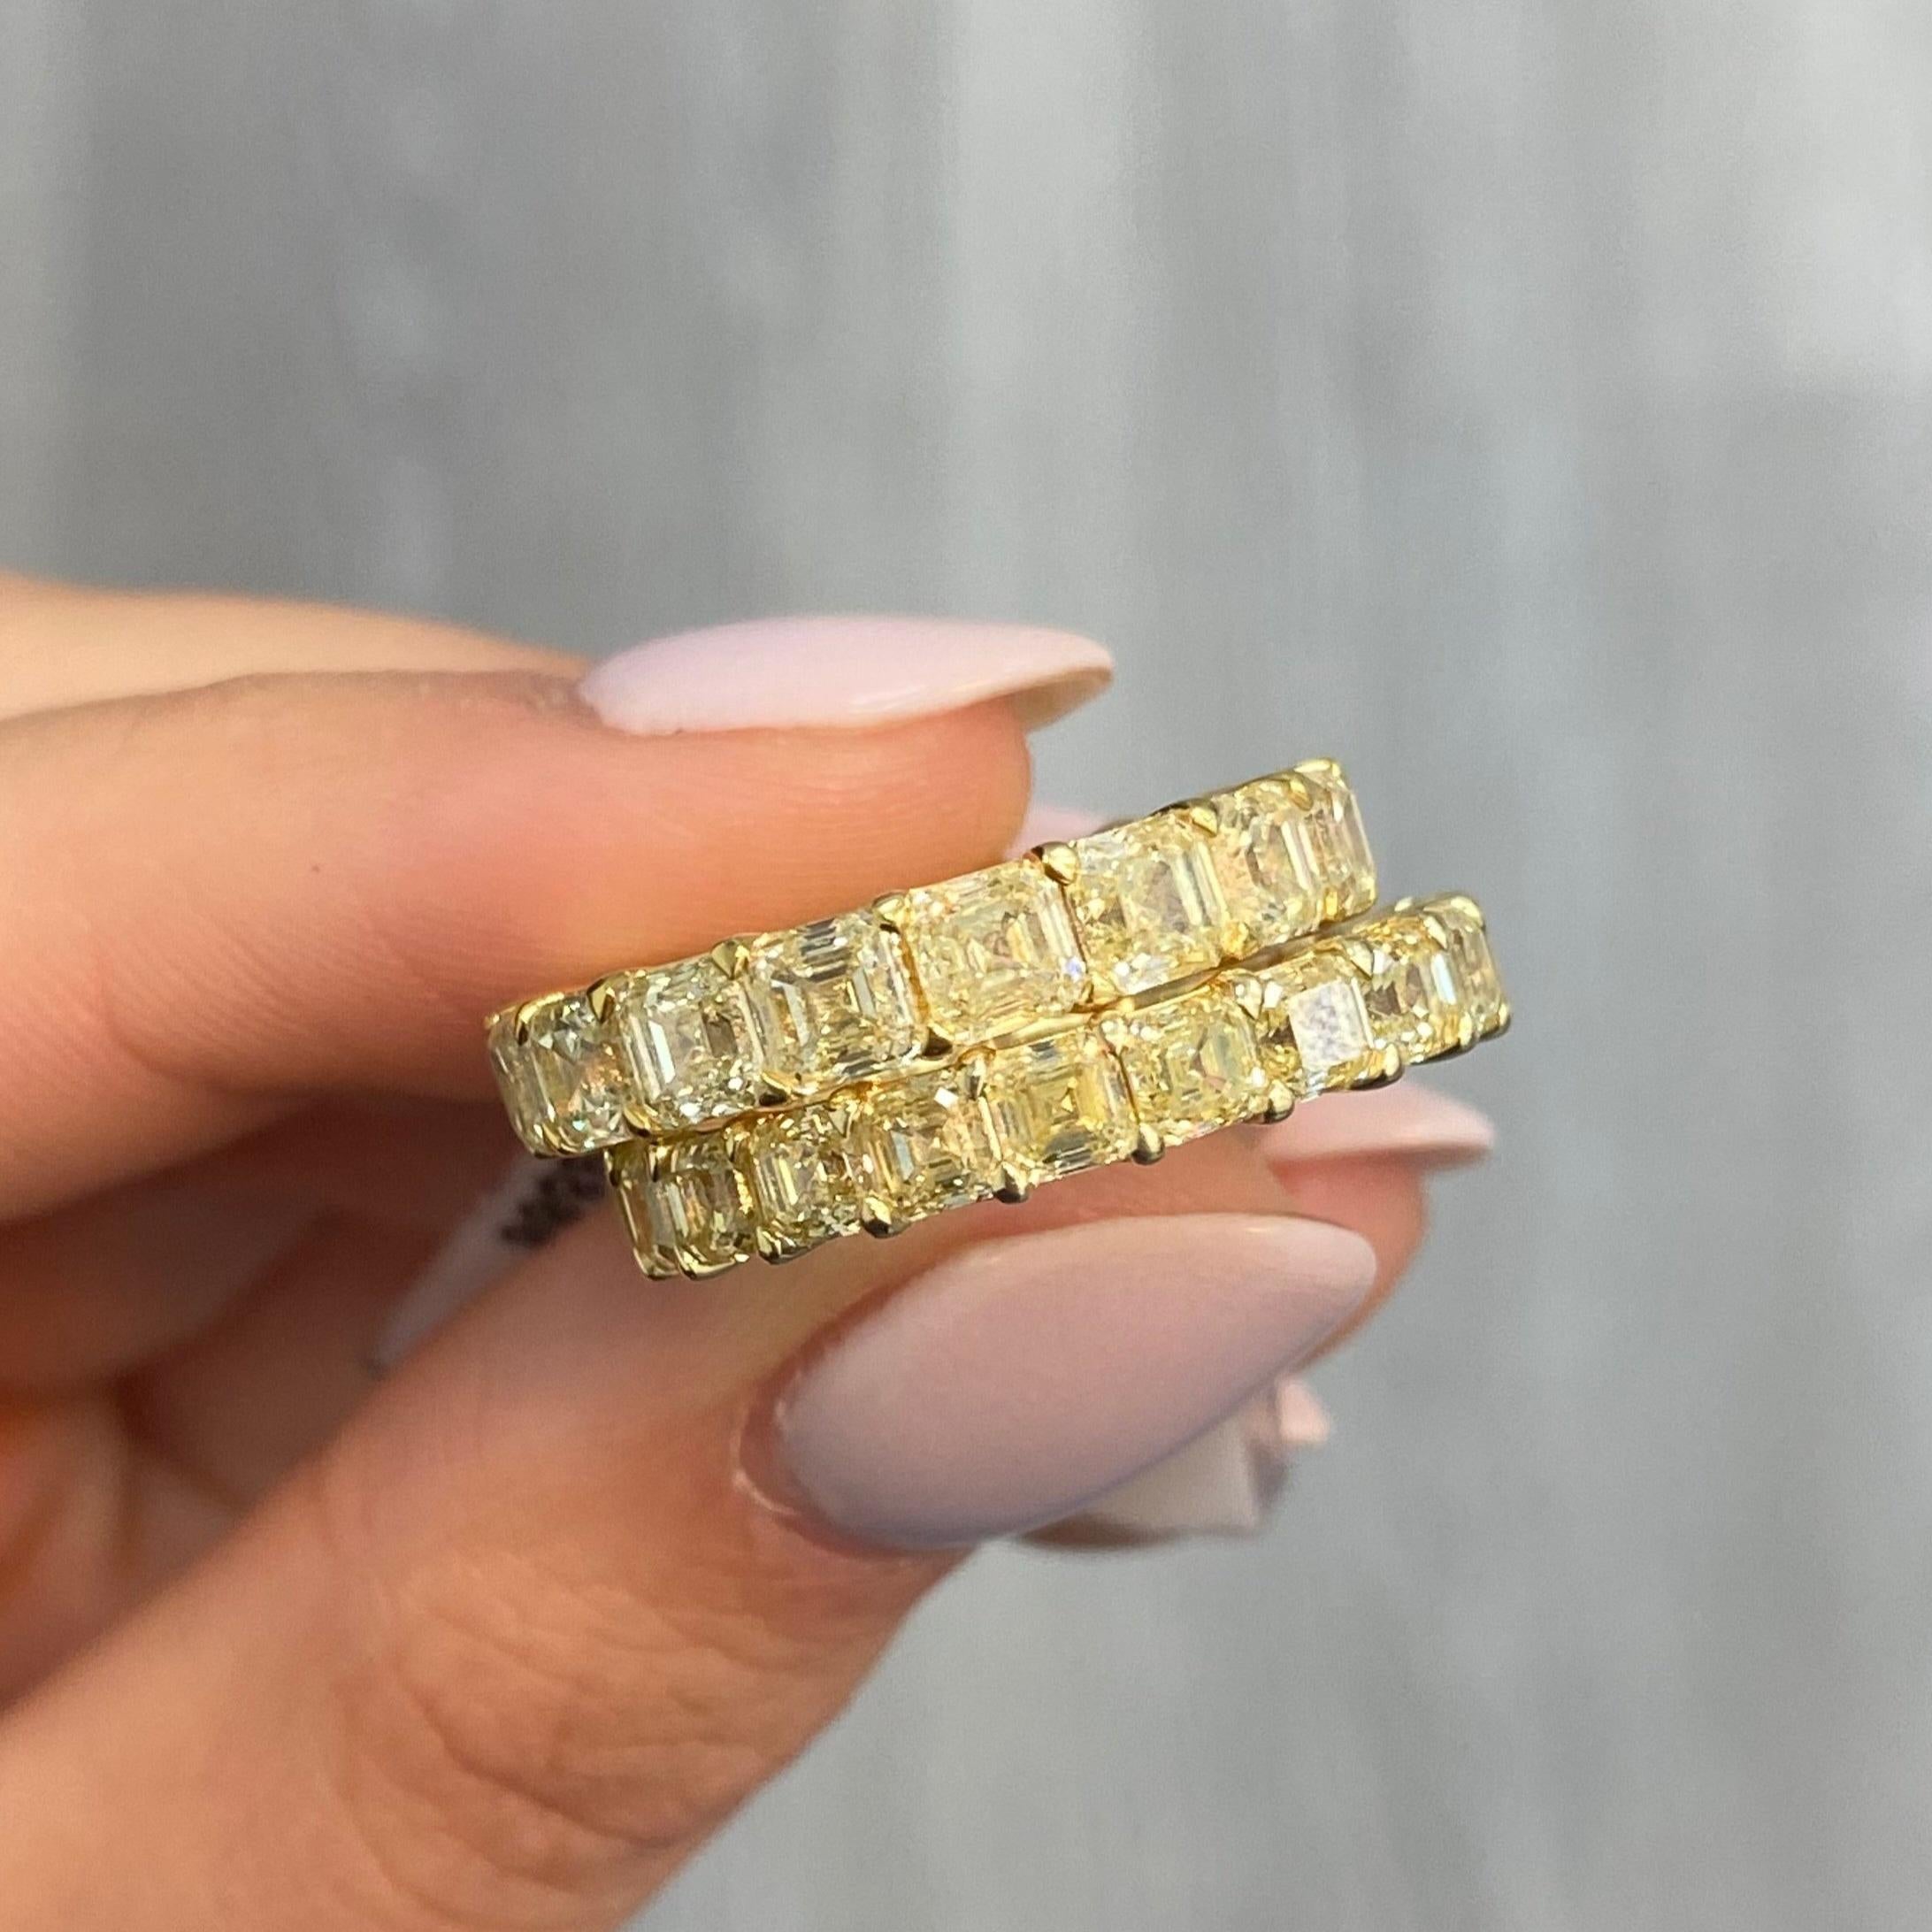 4.90 Carats Total 
Fancy Intense Yellow Diamonds
Asscher Cut Diamonds
VS-VVS Clarity
Eternity Band
Size 6 currently available, any size can be created in the matter of weeks 
Crafted in 18k Yellow Gold 
Handmade in NYC 

This piece can be viewed